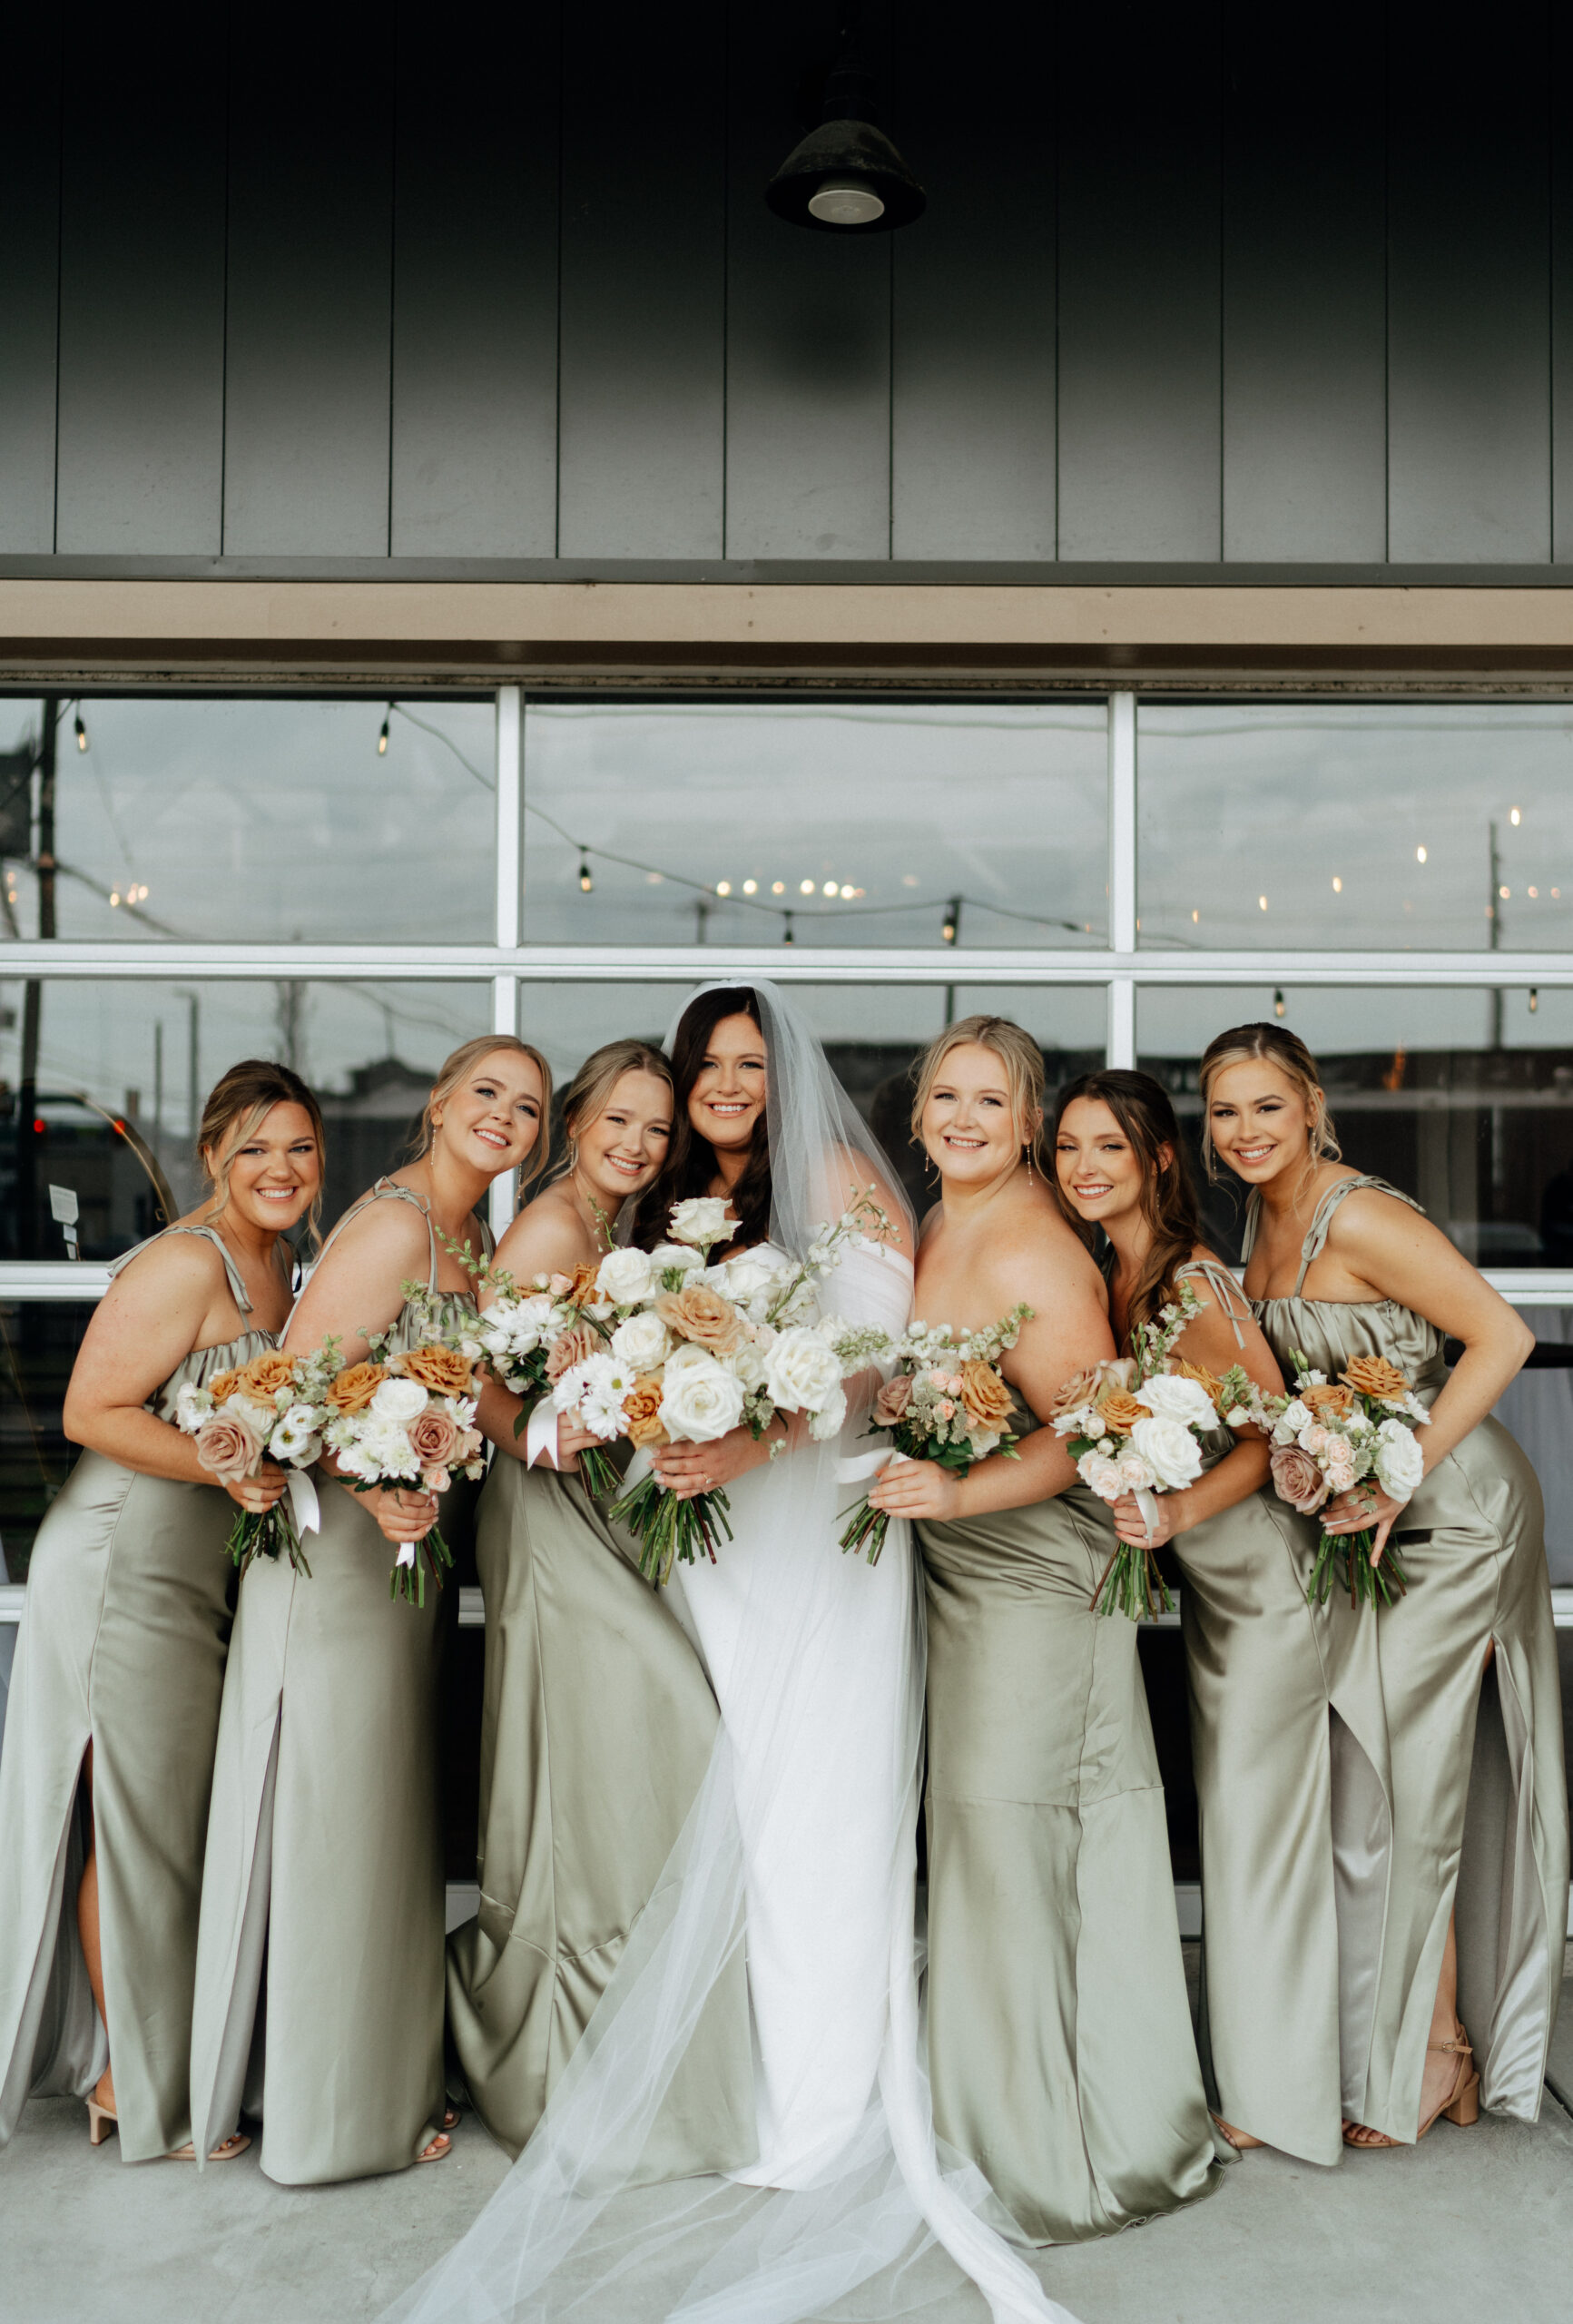 Bride with her bridesmaids taking pictures on her wedding day at 14TENN in Nashville, TN